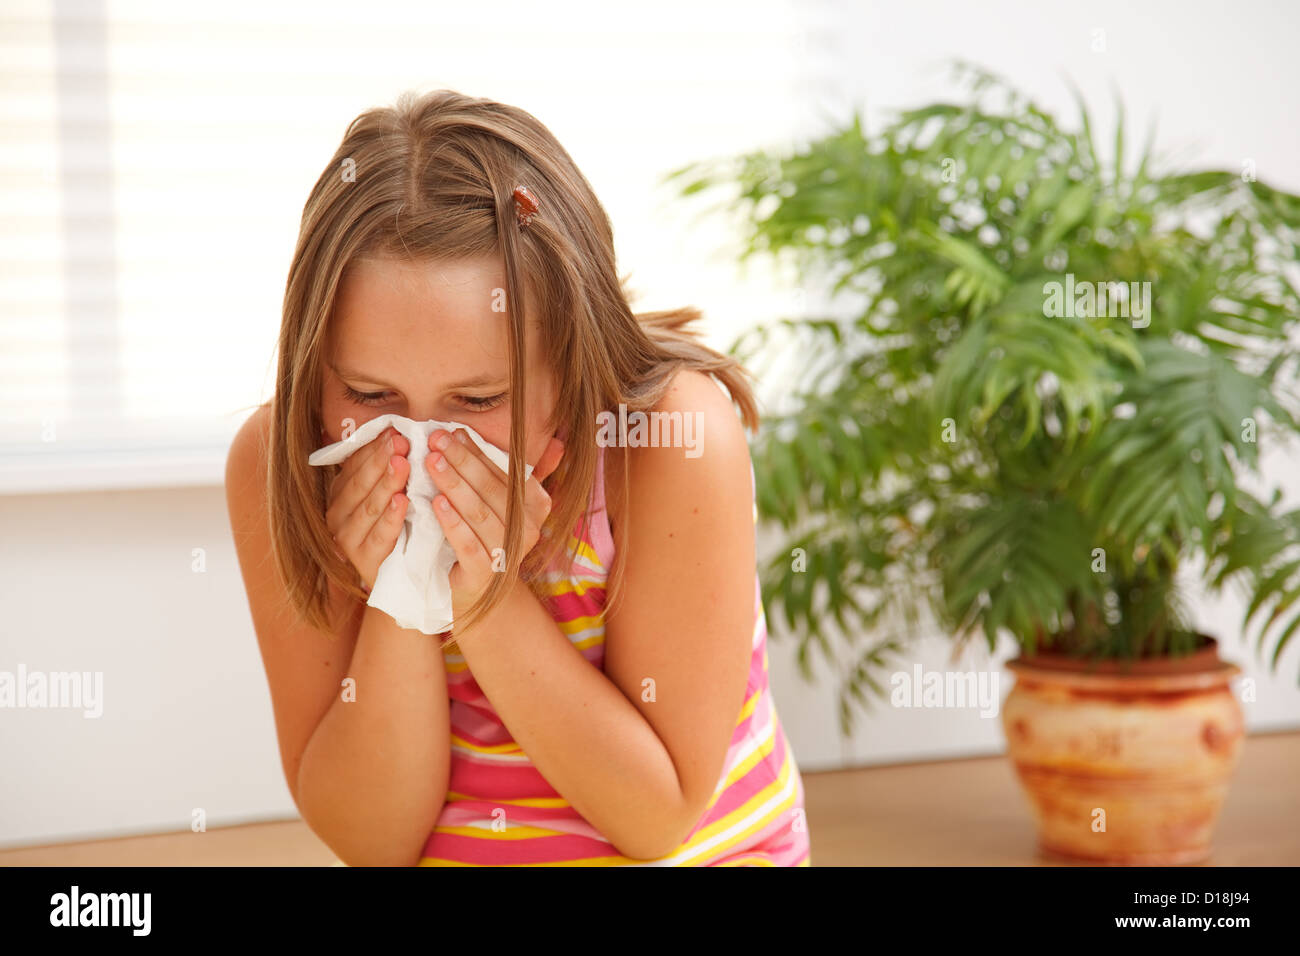 Teen girl blowing out her nose because of allergic reaction on plants Stock Photo